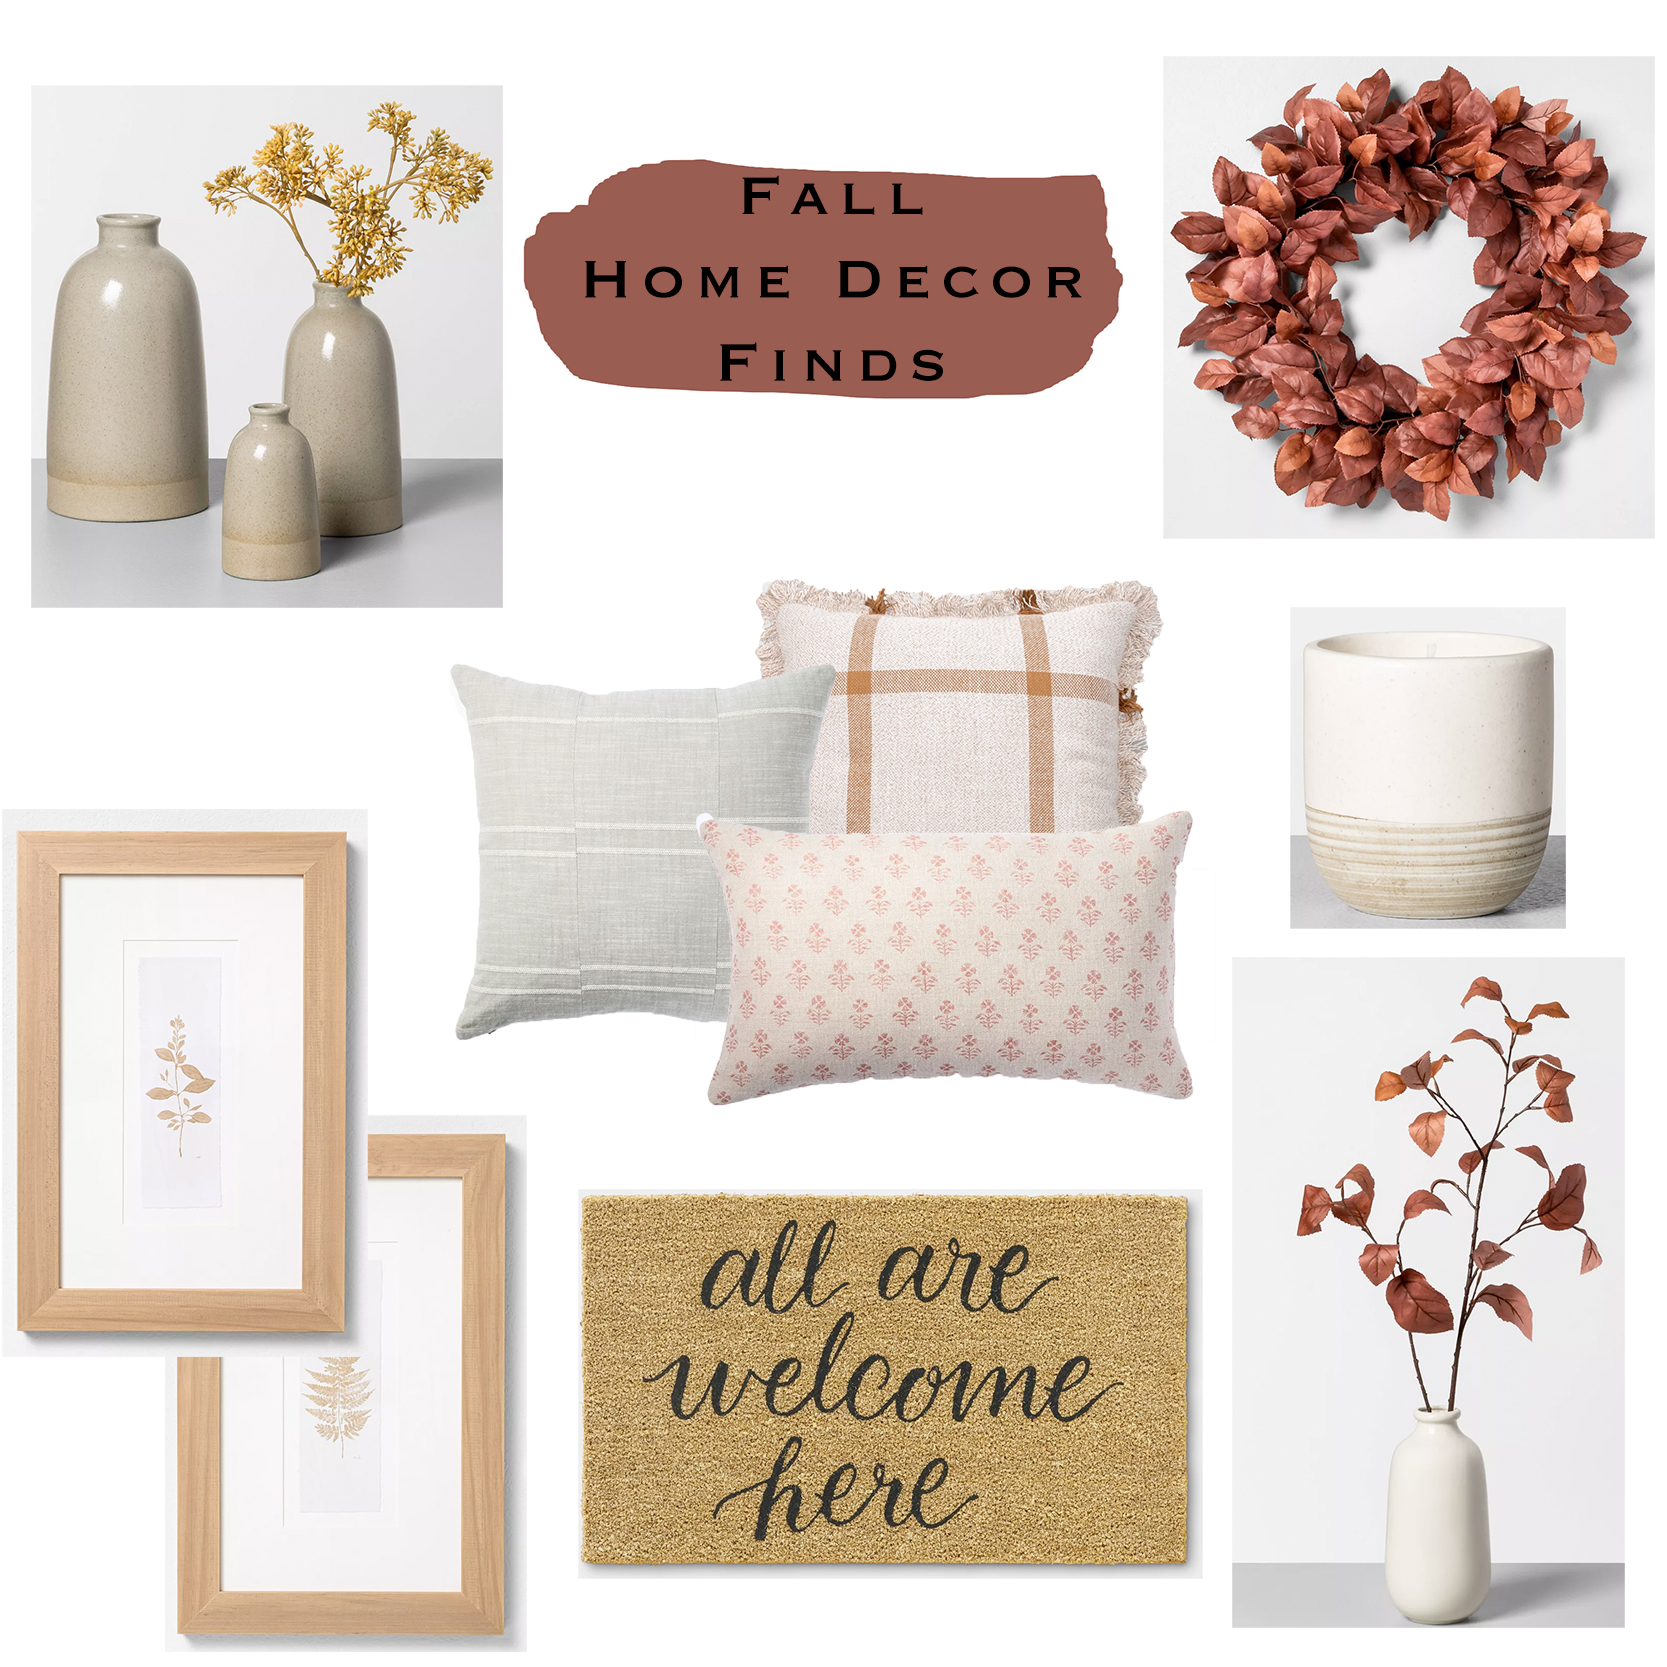 Target Fall Home Decor Finds 2020 - Stephanie Hoey Interiors